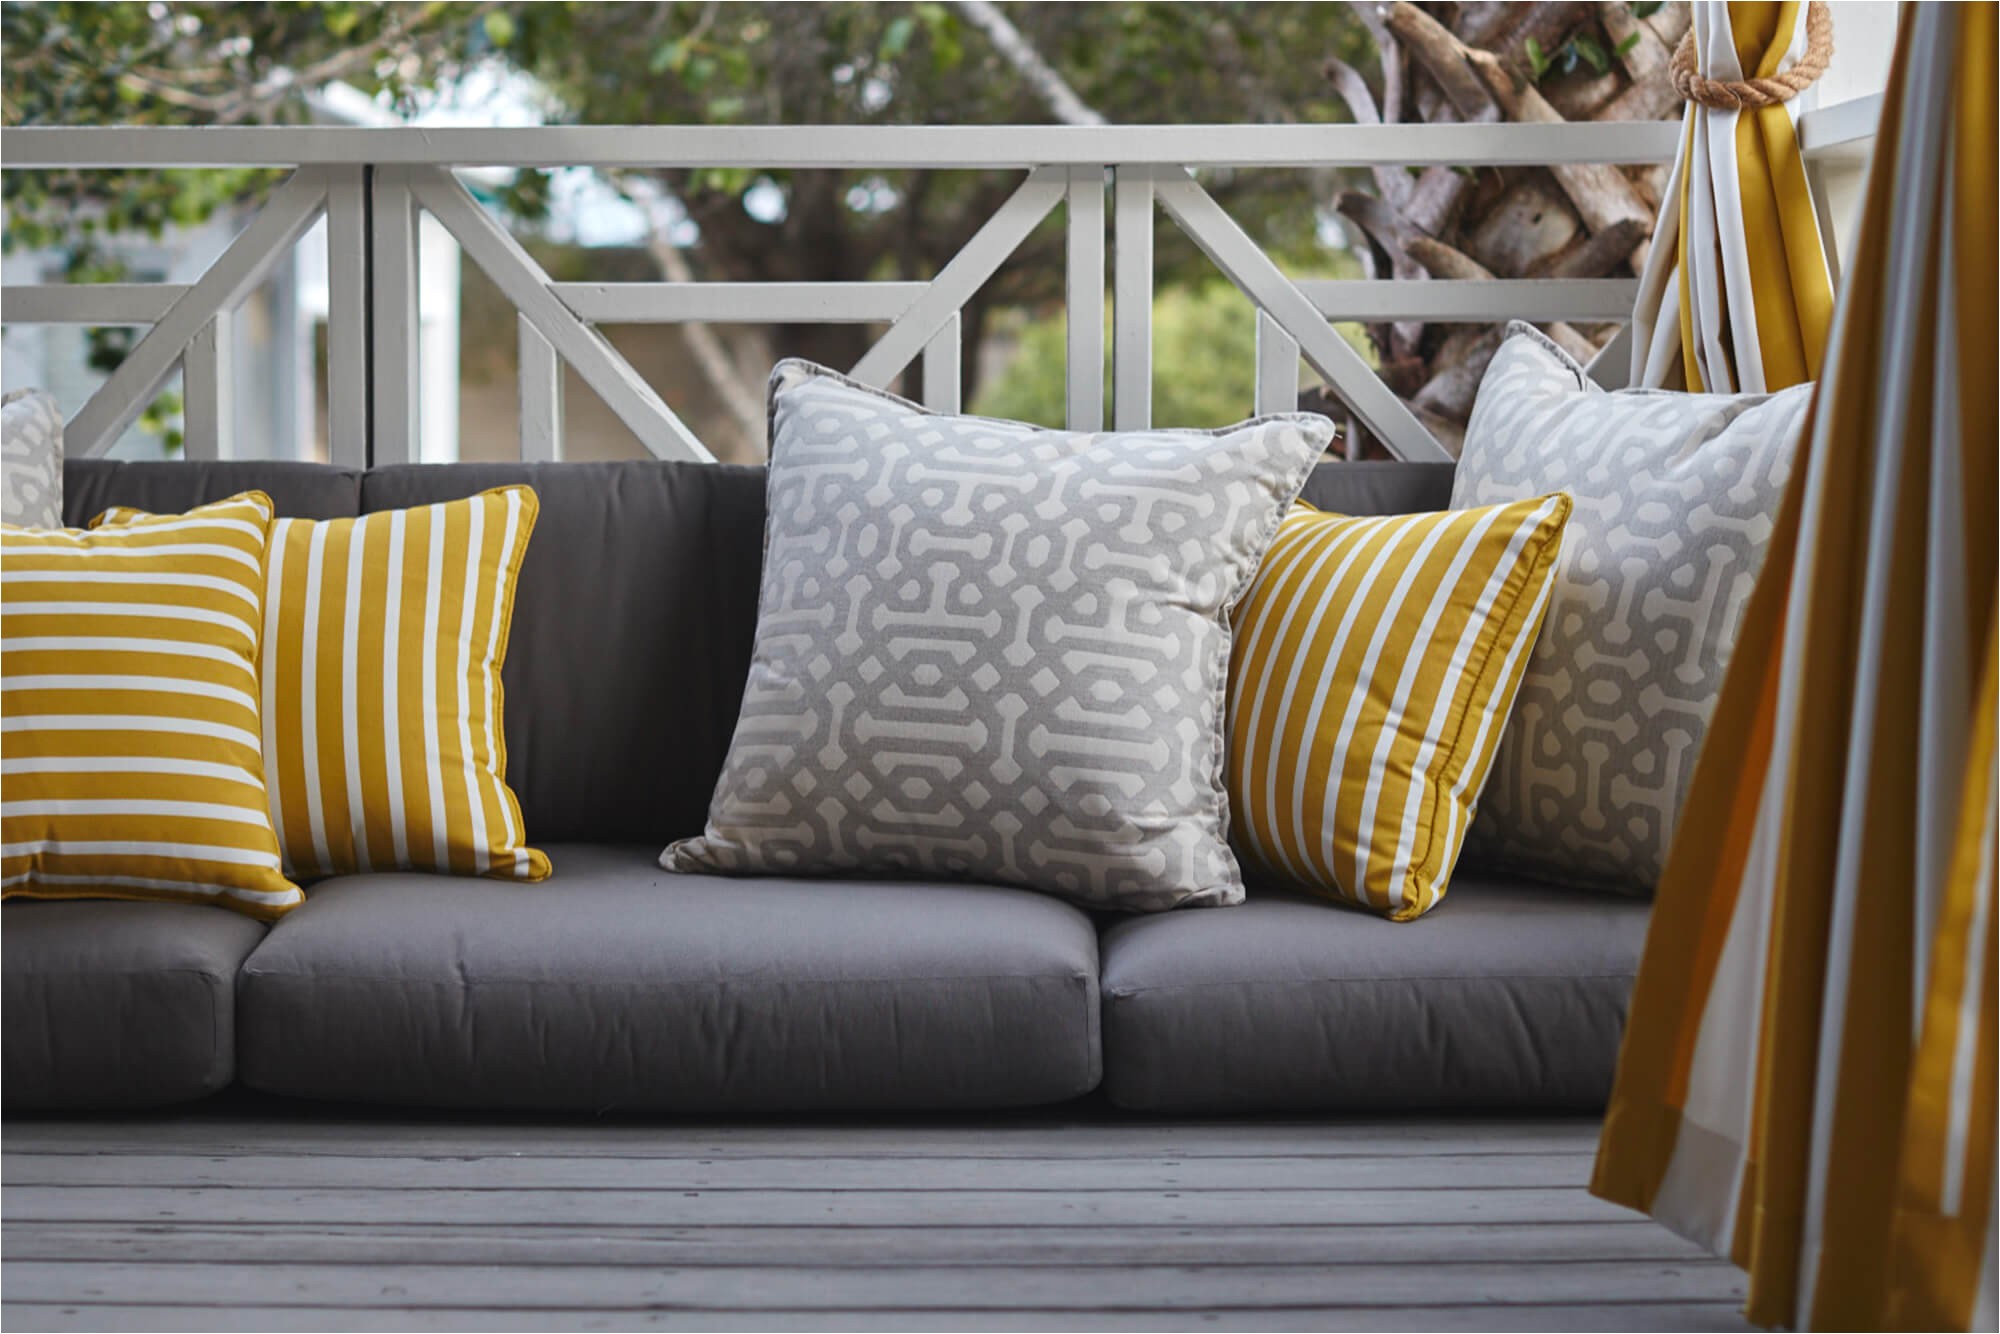 grey outdoor cushions with yellow and grey decorative pillows and yellow drapery outdoor sofa